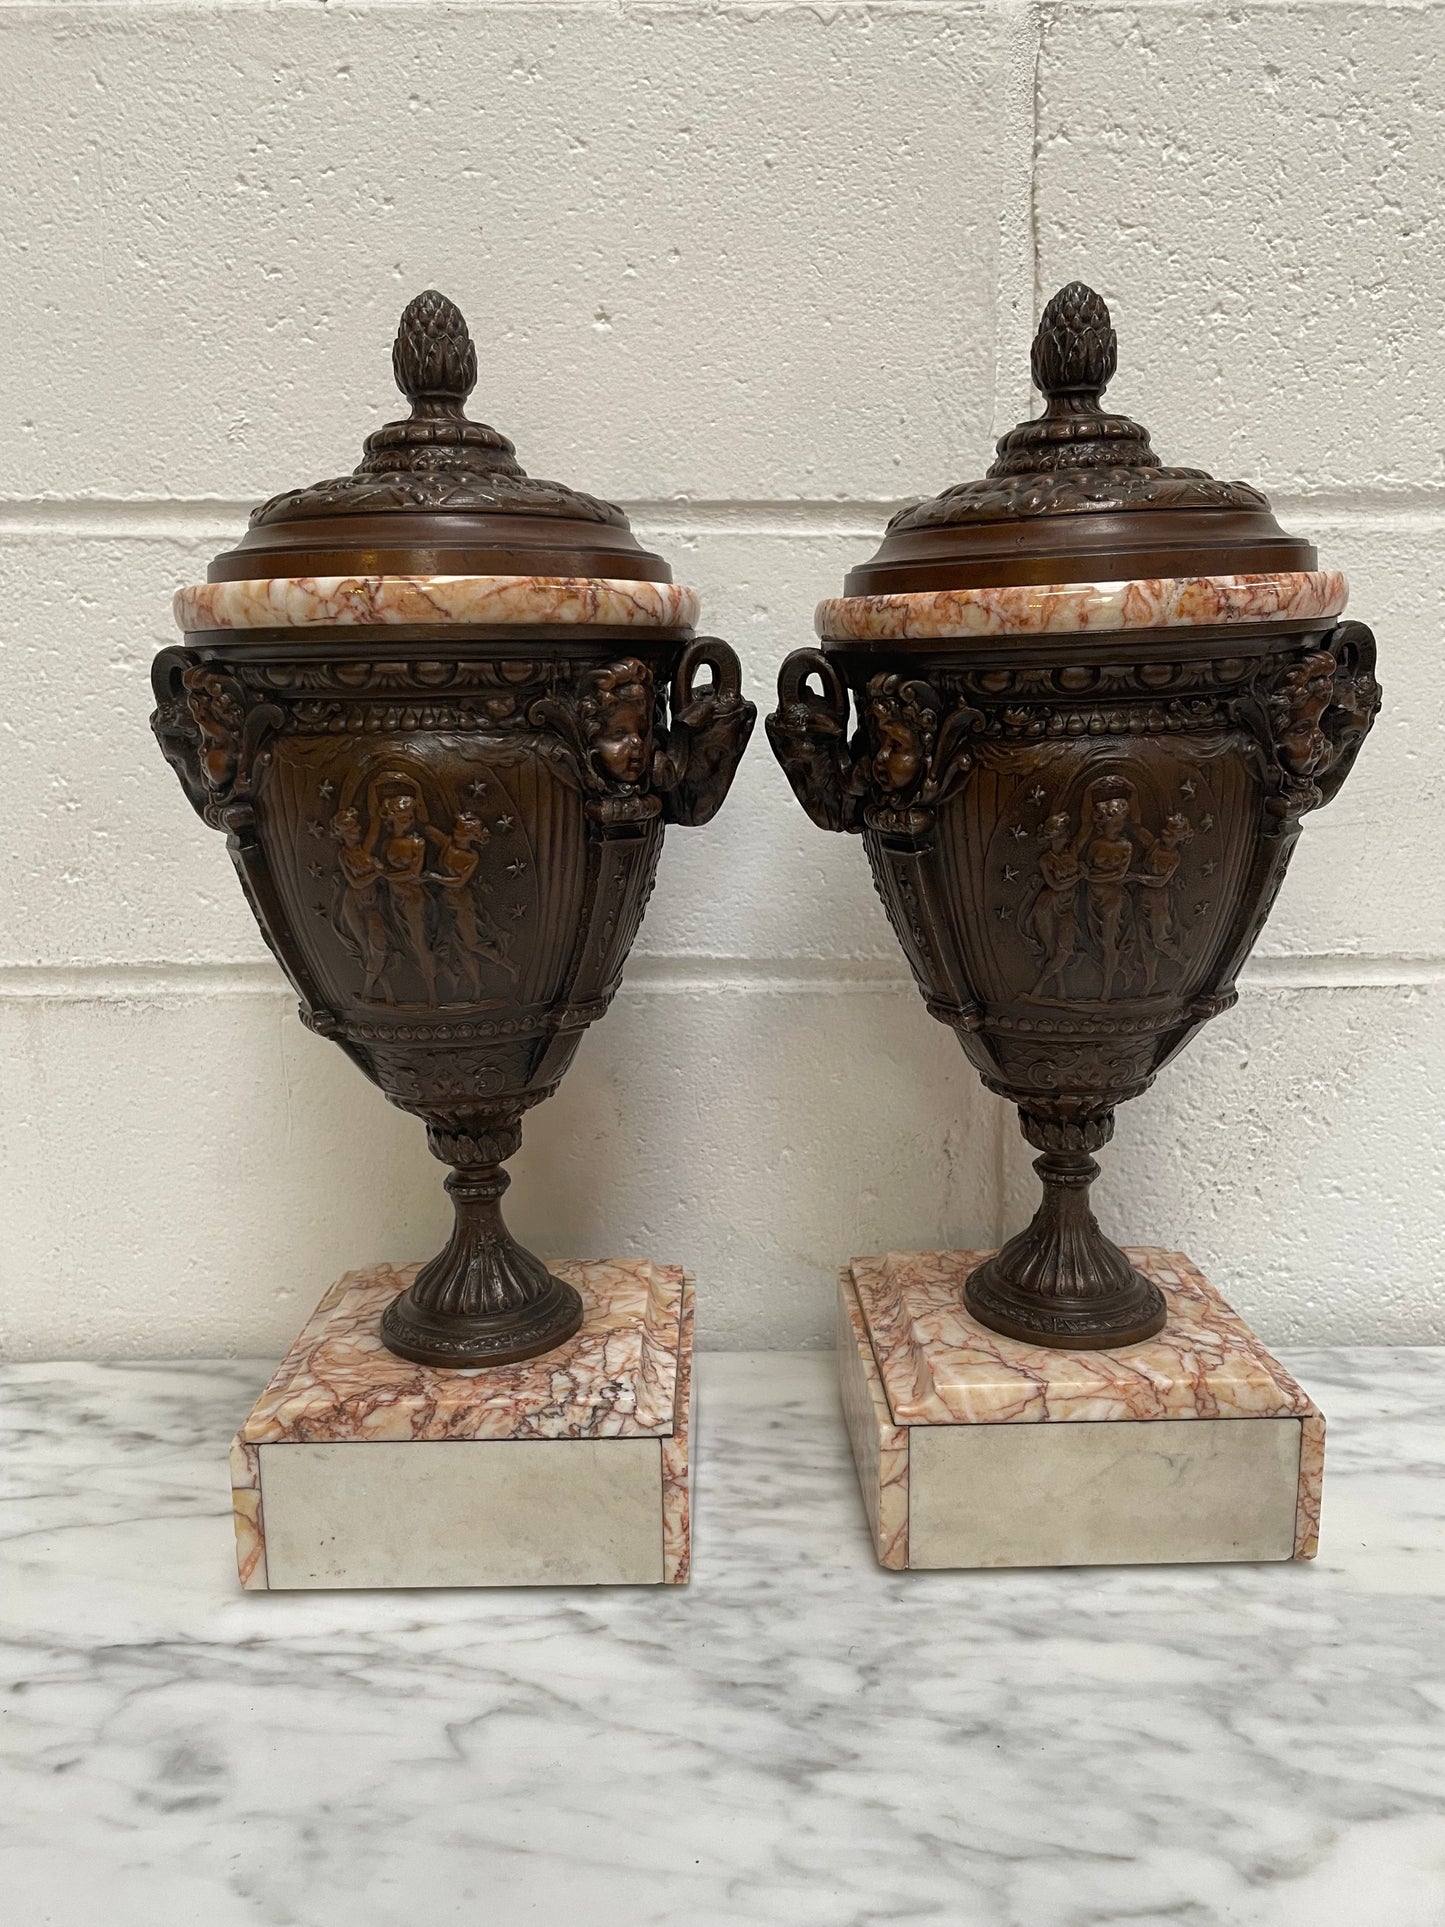 Pair of French Bronzed Spelter Urns on a Marble Base